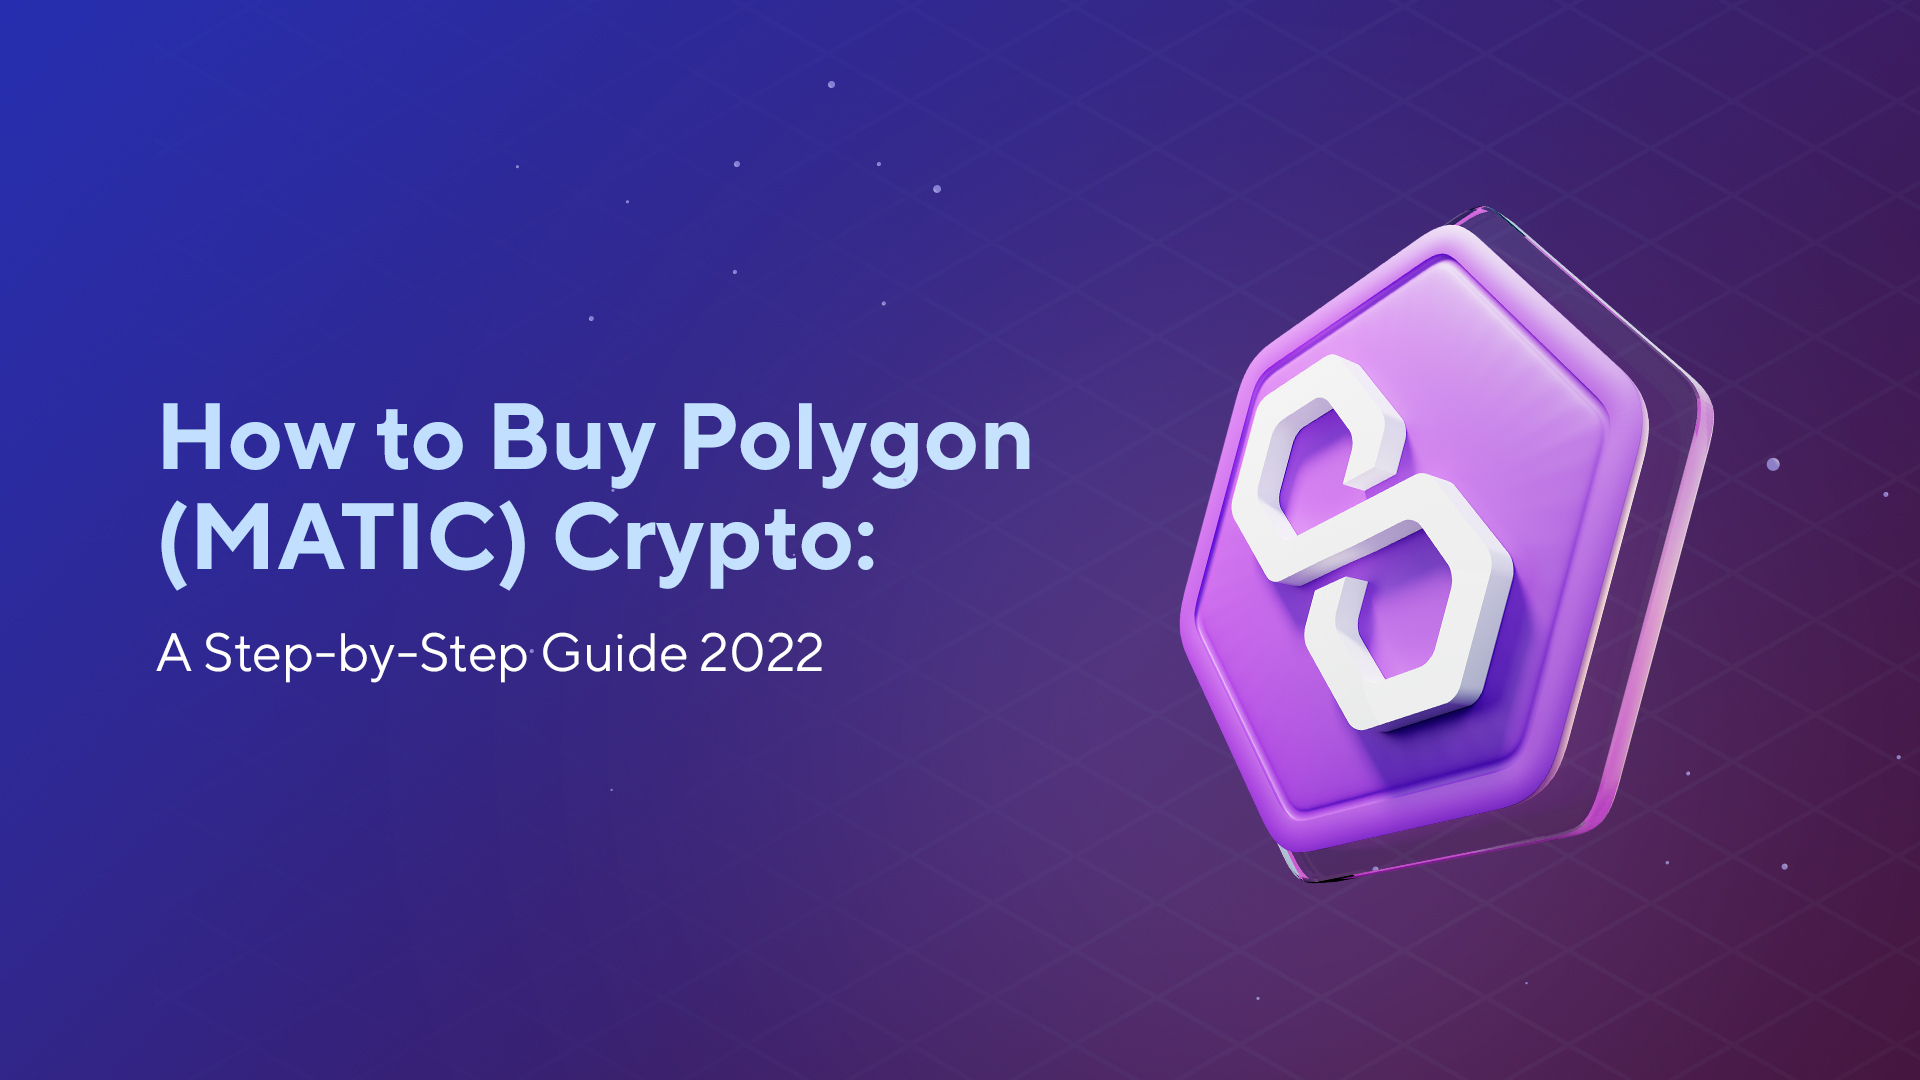 How to Buy Polygon (MATIC) Crypto: A Step-by-Step Guide 2022